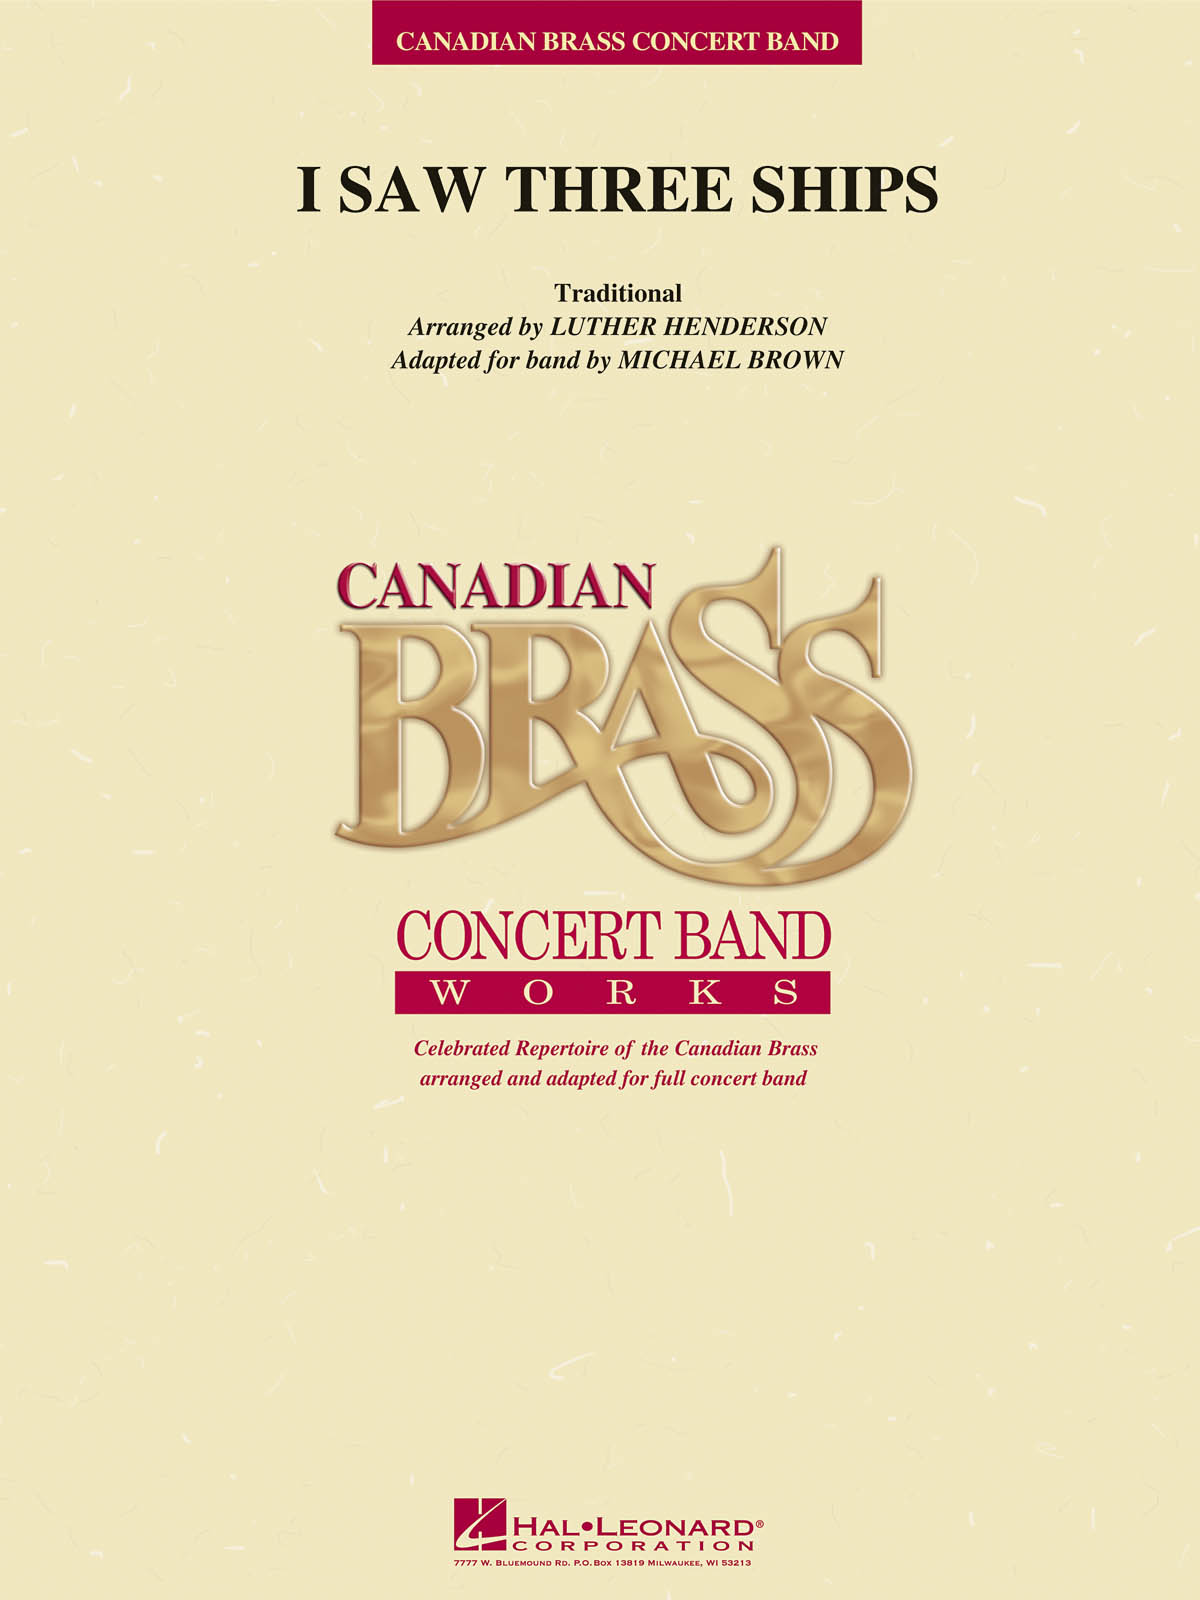 The Canadian Brass: I Saw Three Ships: Concert Band: Score